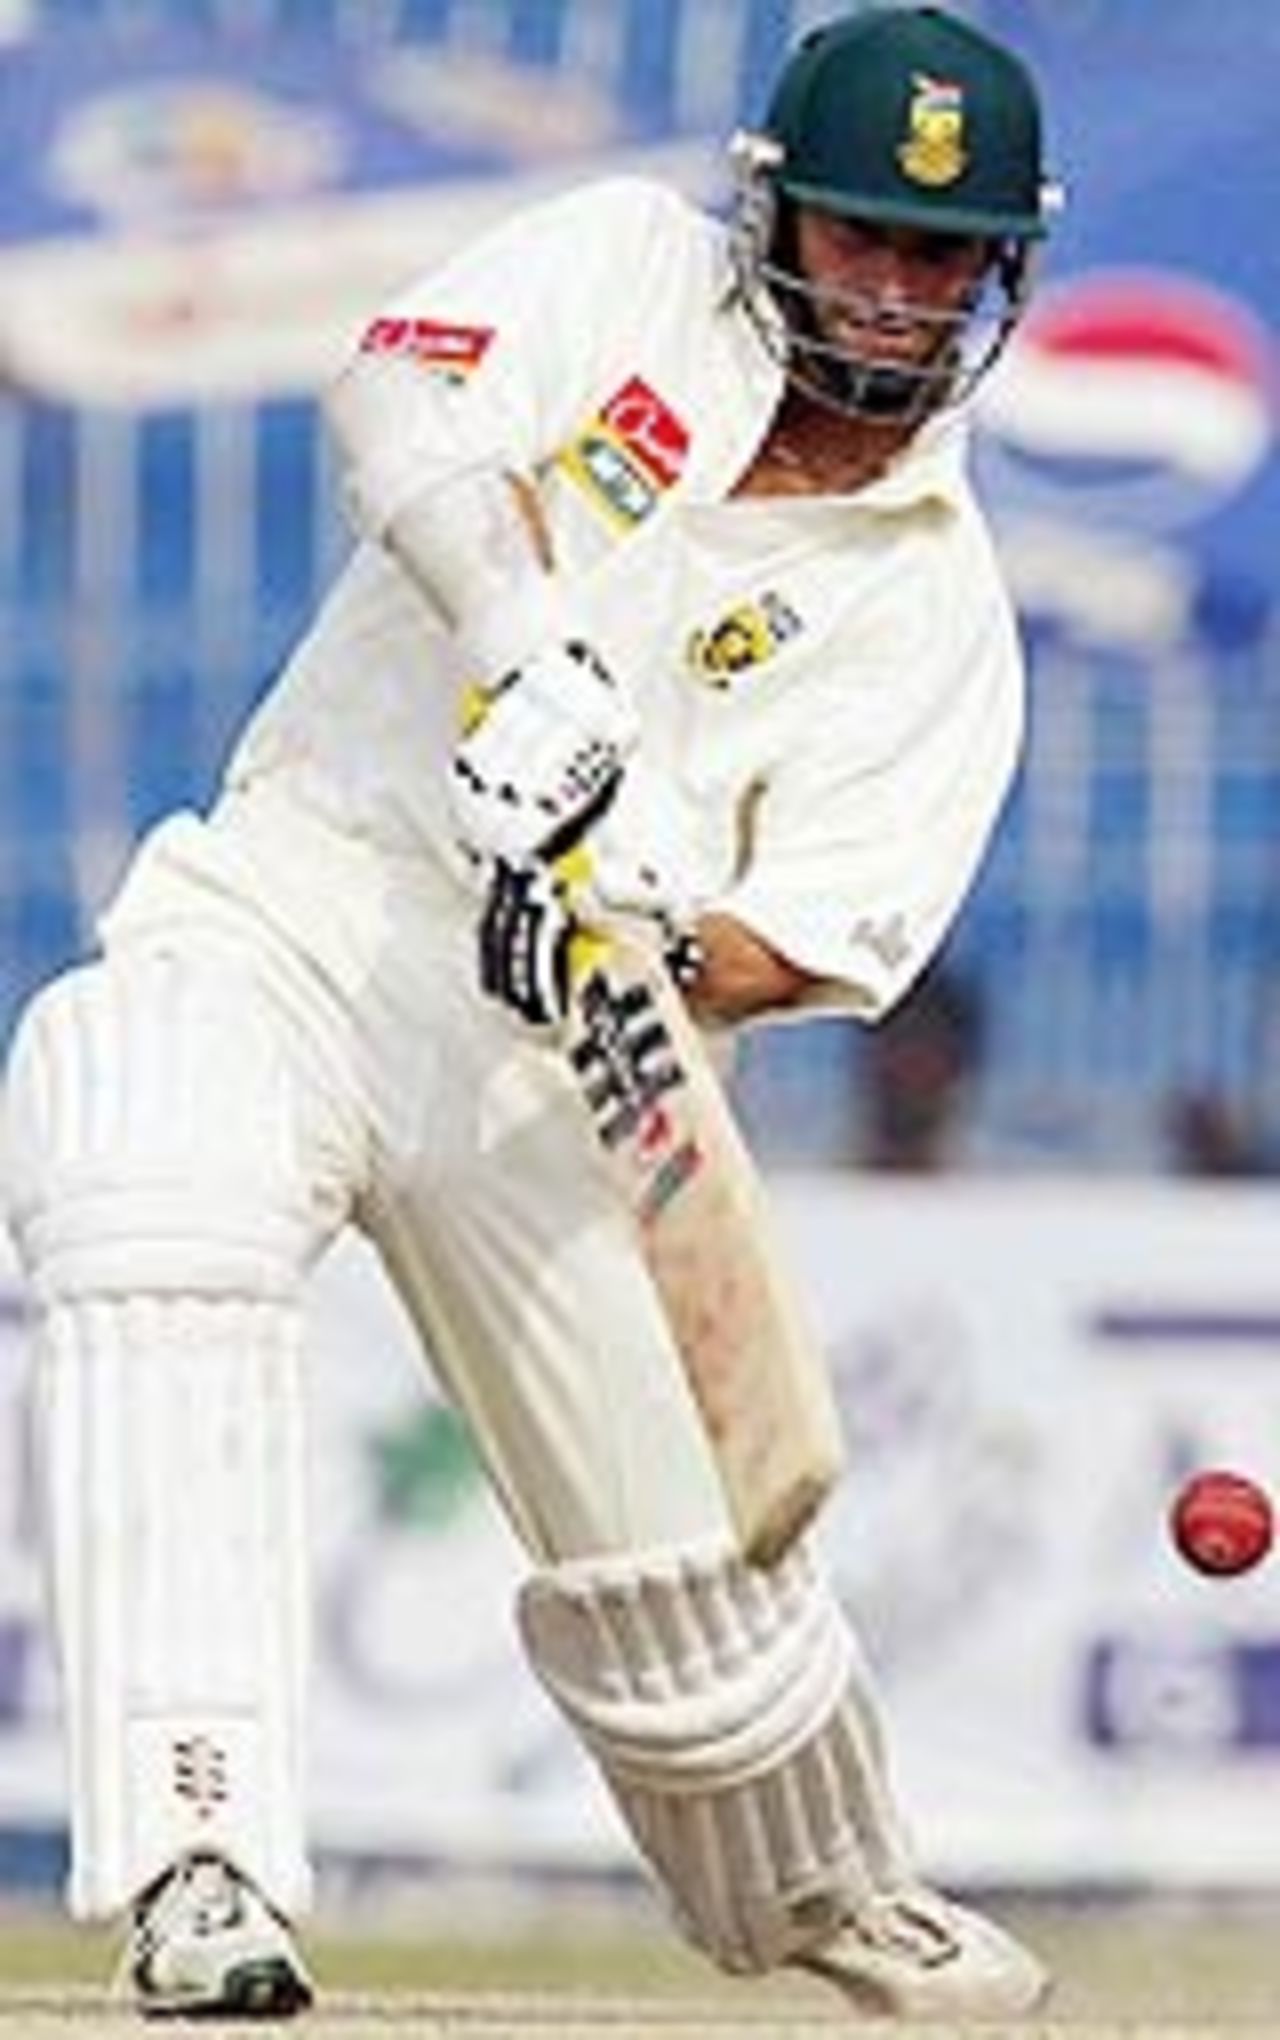 Gary Kirsten drives en-route to his century, Pakistan v South Africa, Day 4, 2nd Test, Faisalabad, October 27, 2003.